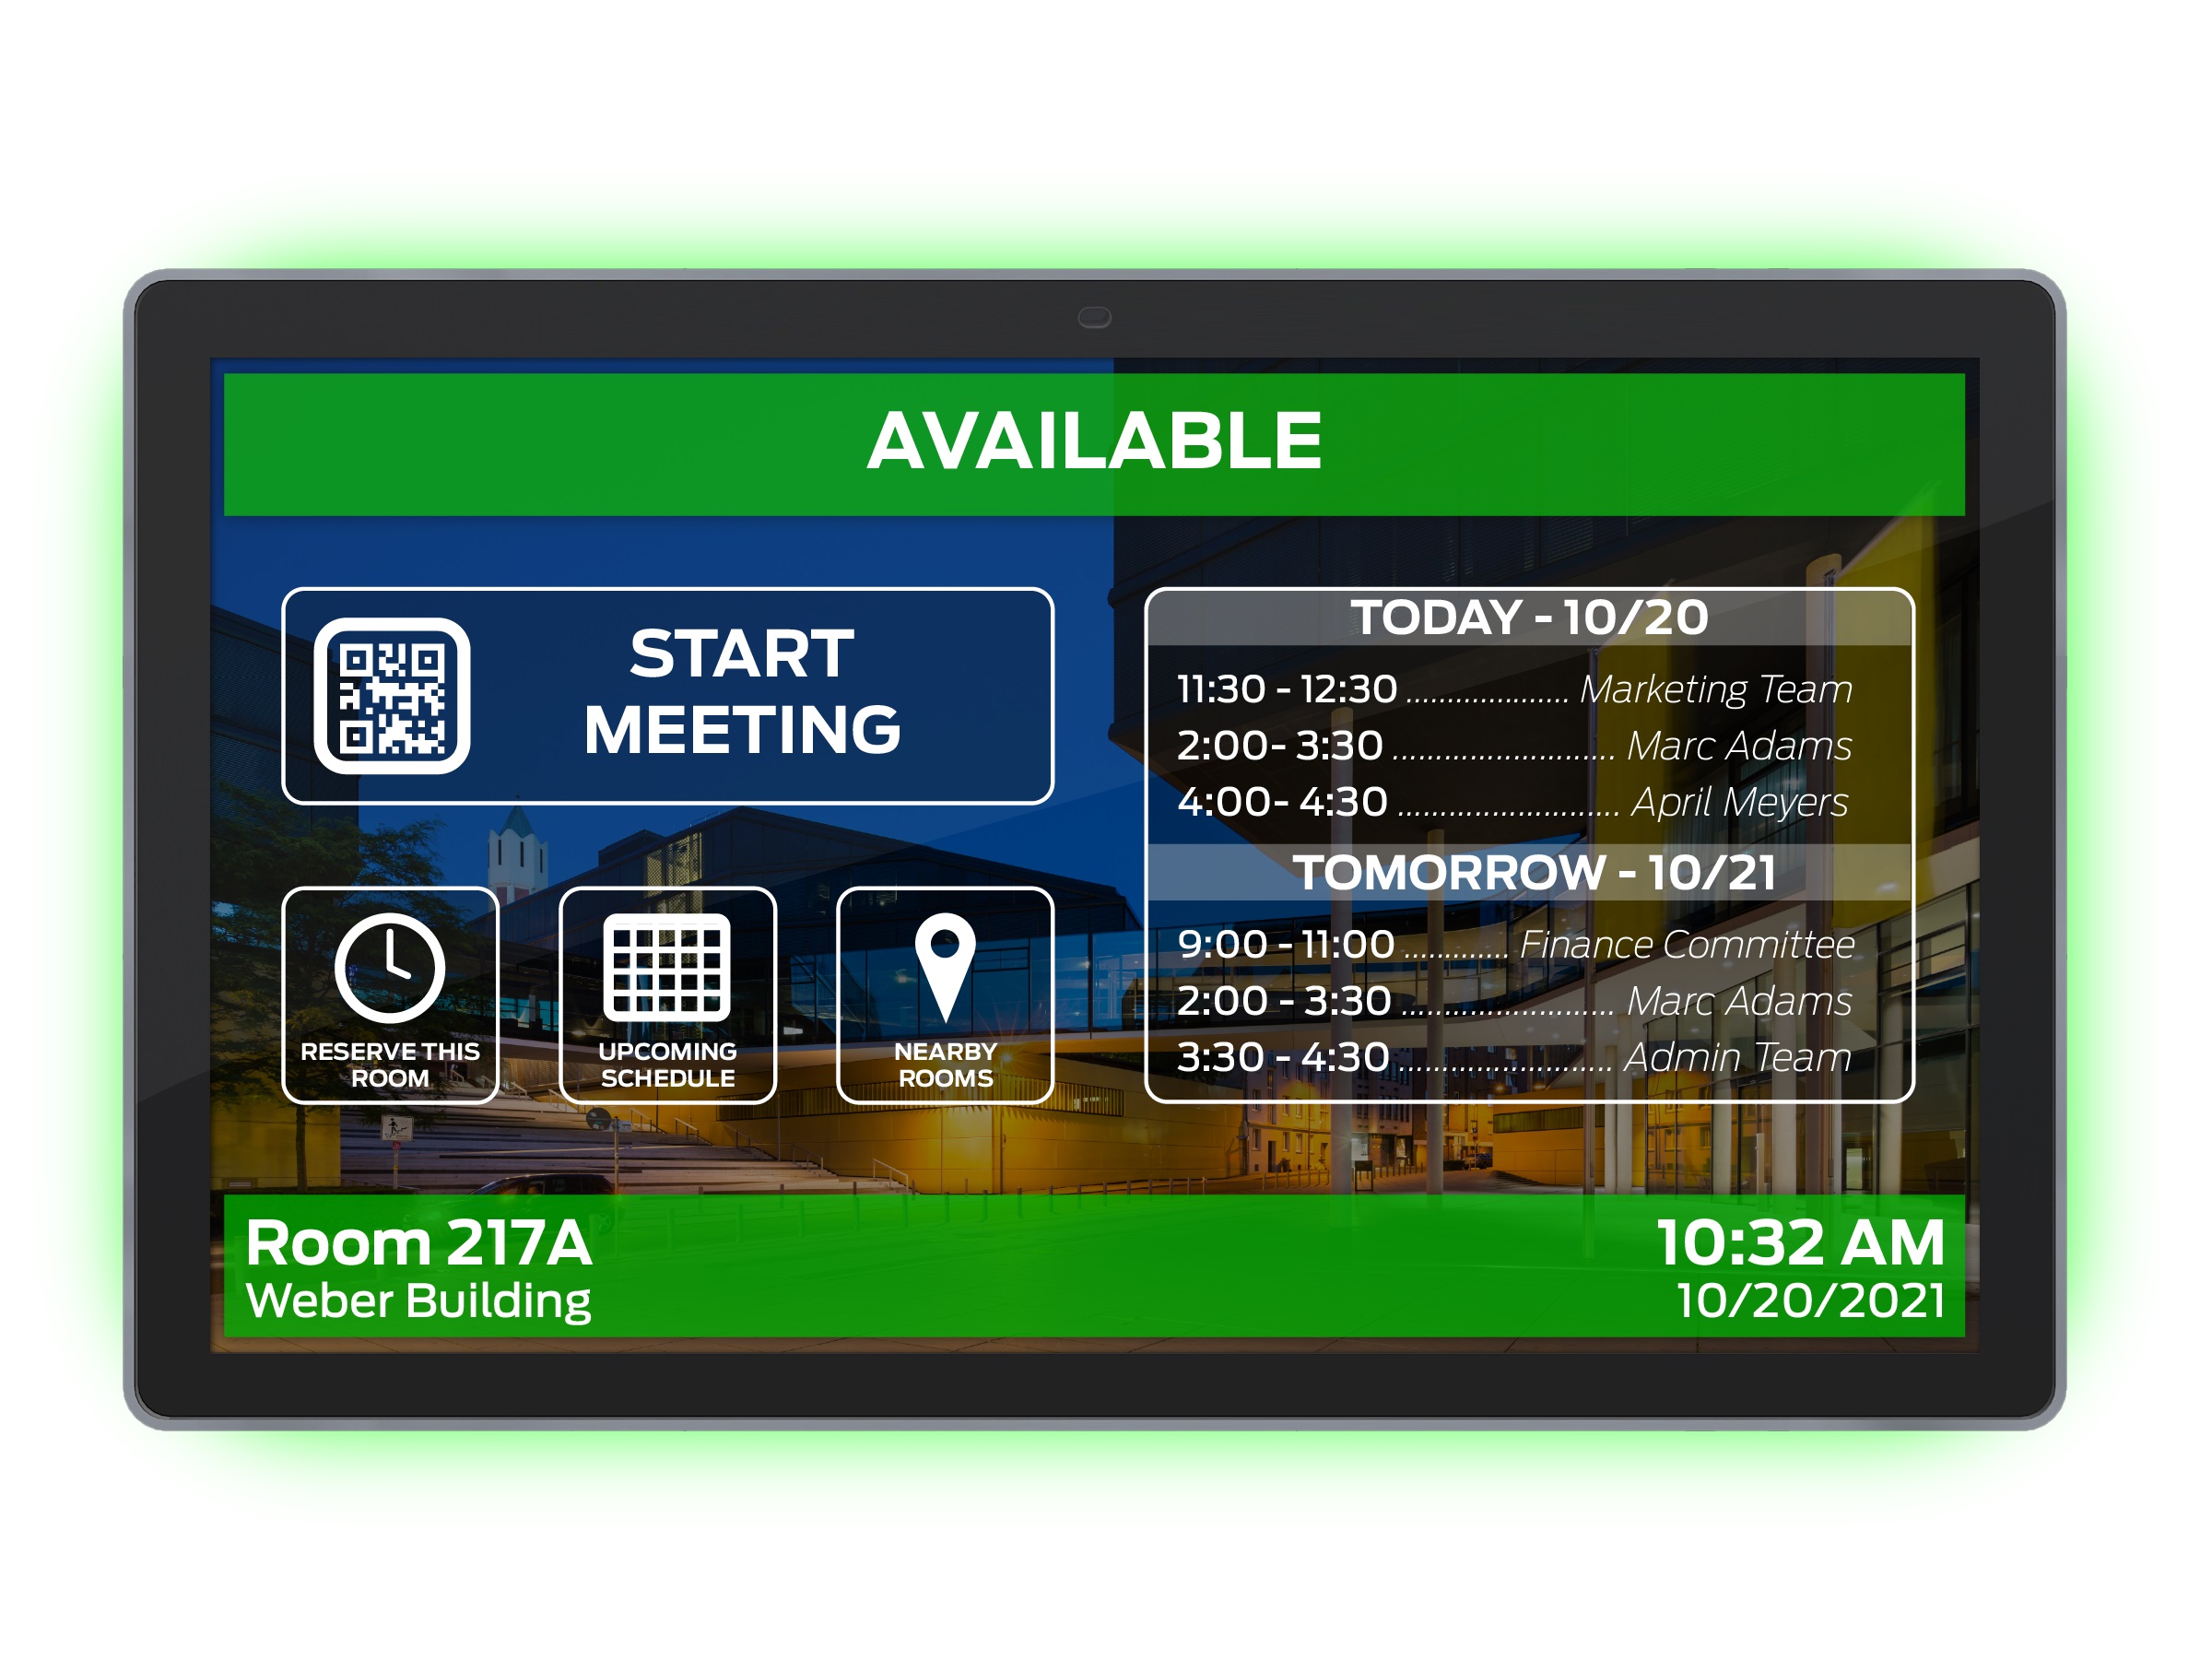 RXT-8WM-B 8 inch In-Wall ReAX Touch Panel Control System with Serial/Relay/I/O/IR and Ethernet Control Ports by Aurora Multimedia